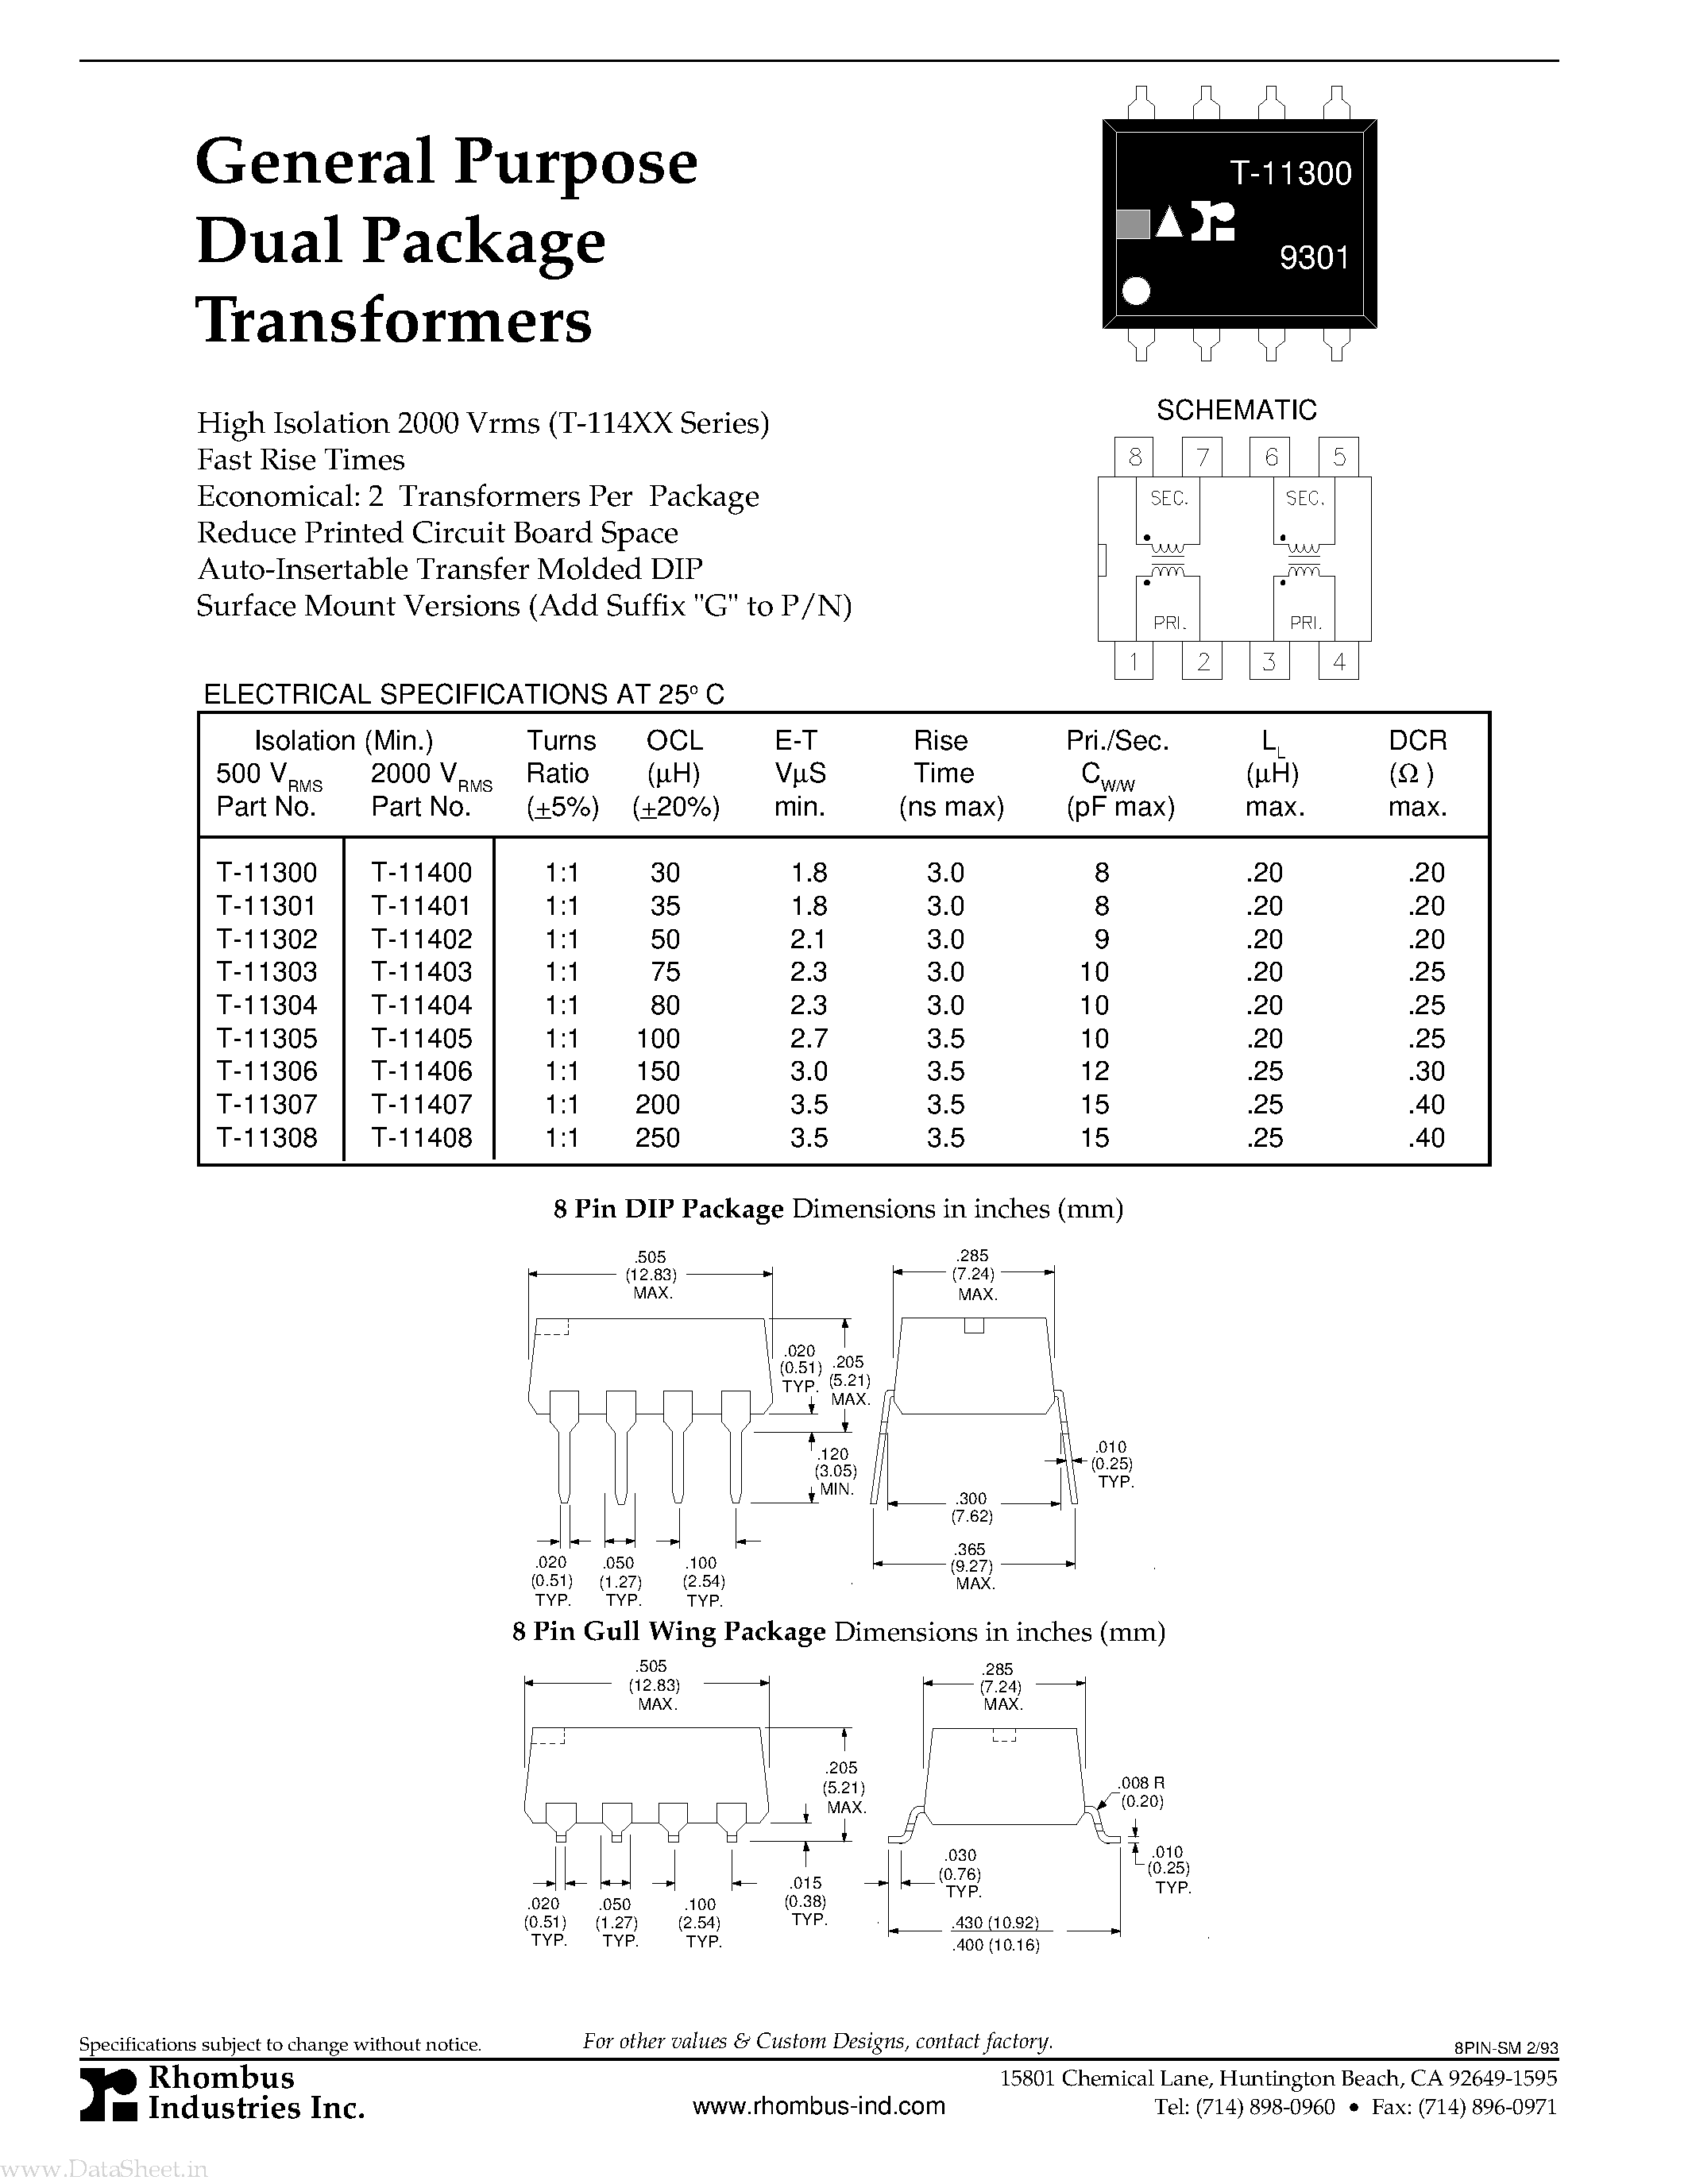 Даташит T-11300 - (T-11400 - T-11408) General Purpose Dual Package Transformers страница 1